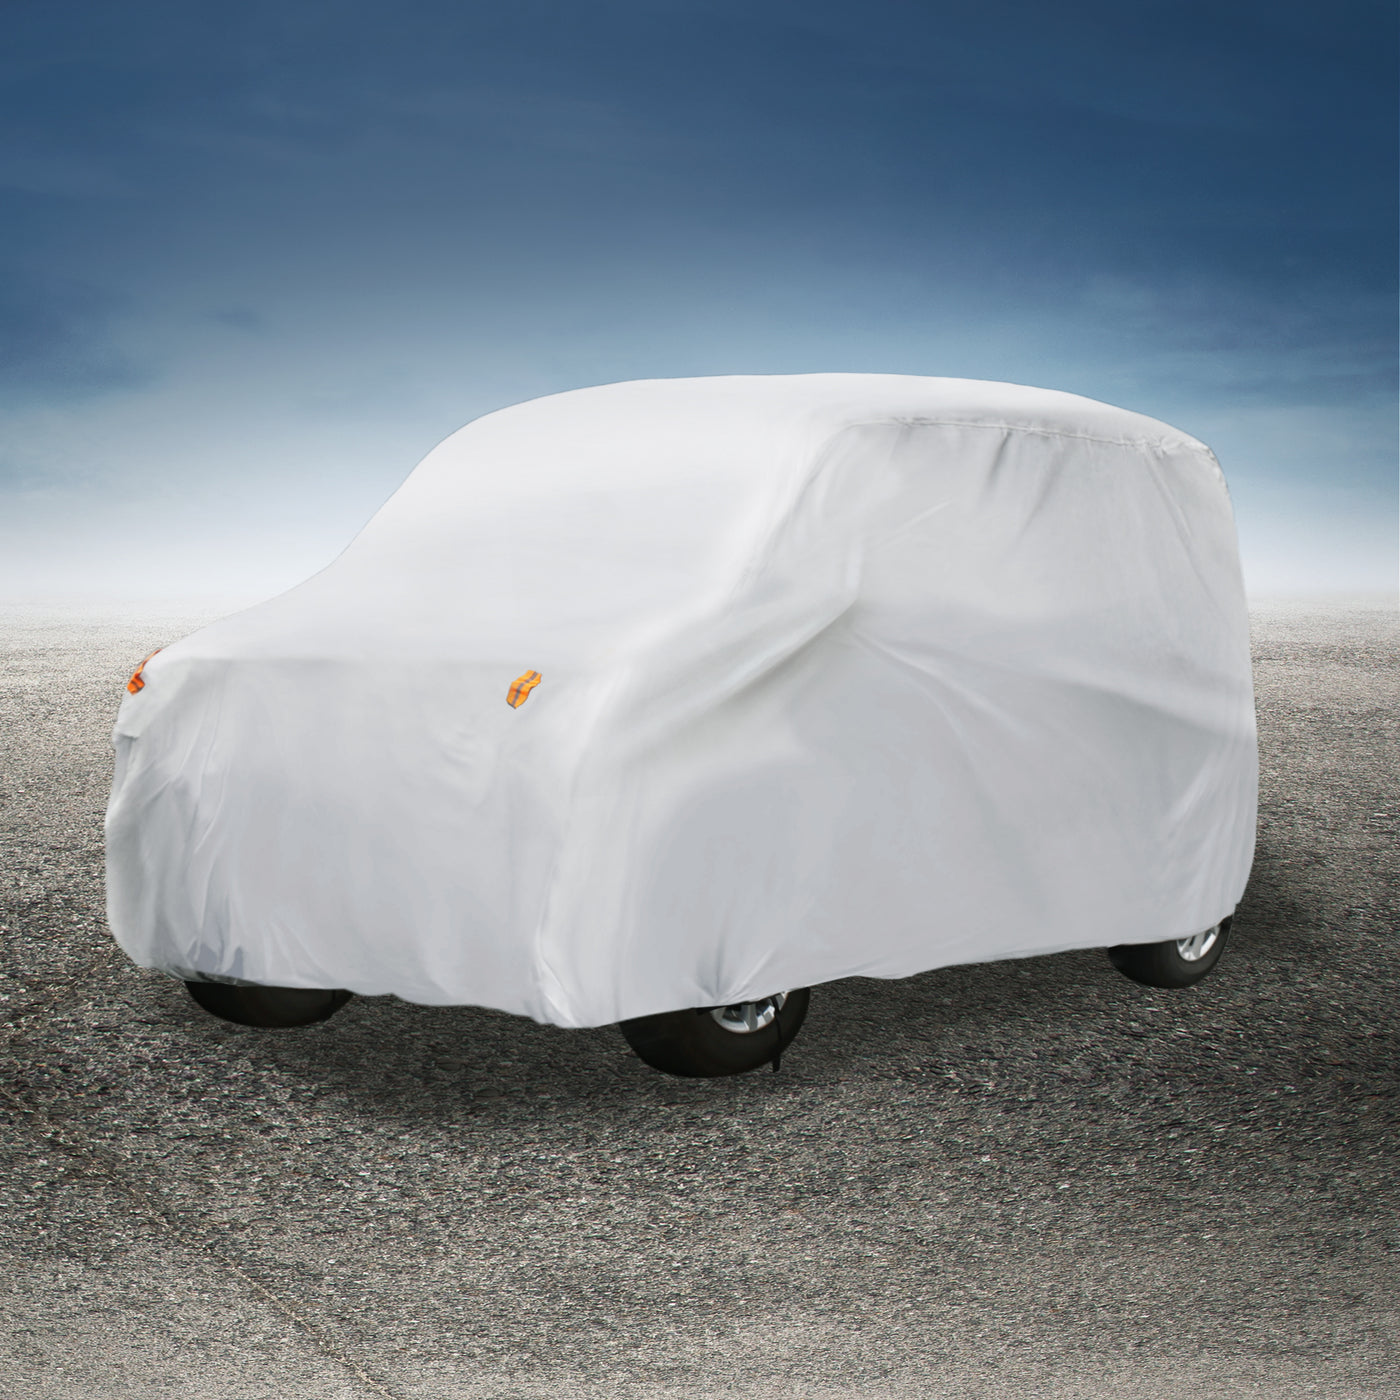 X AUTOHAUX 370x175x160cm 12.1x5.7x5.2ft Universal Car Cover Outdoor Dustproof All Weather Waterproof Car Protect Silver Tone